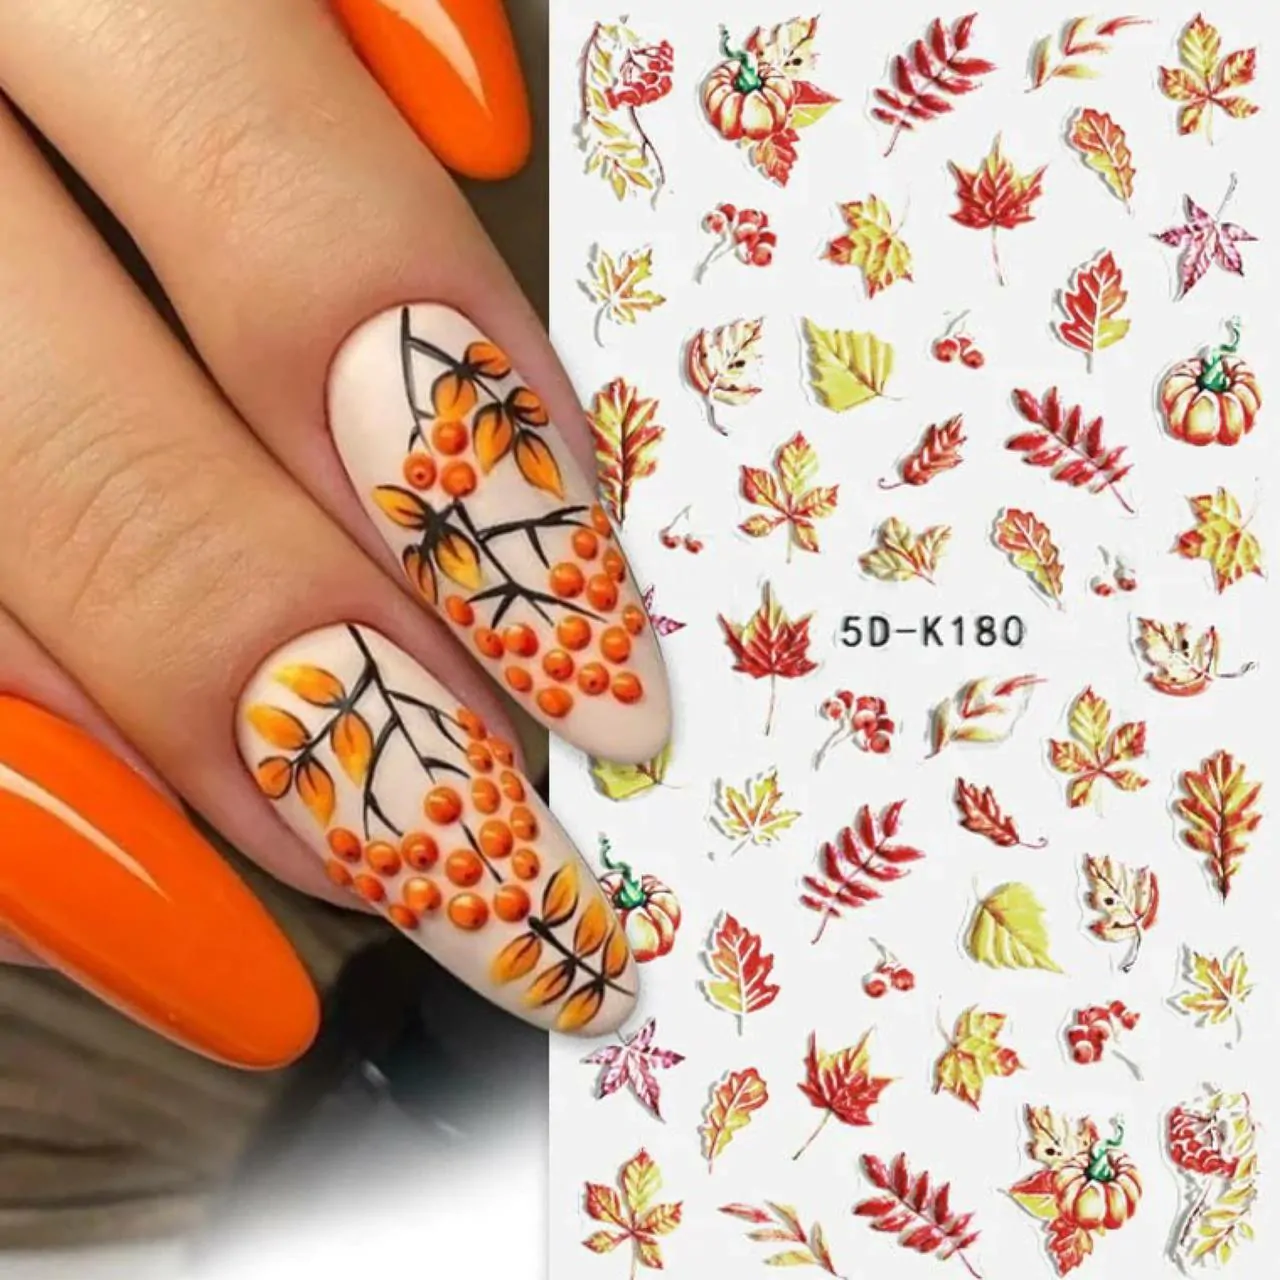 60 Fall Nails Designs and Ideas to Try This Season